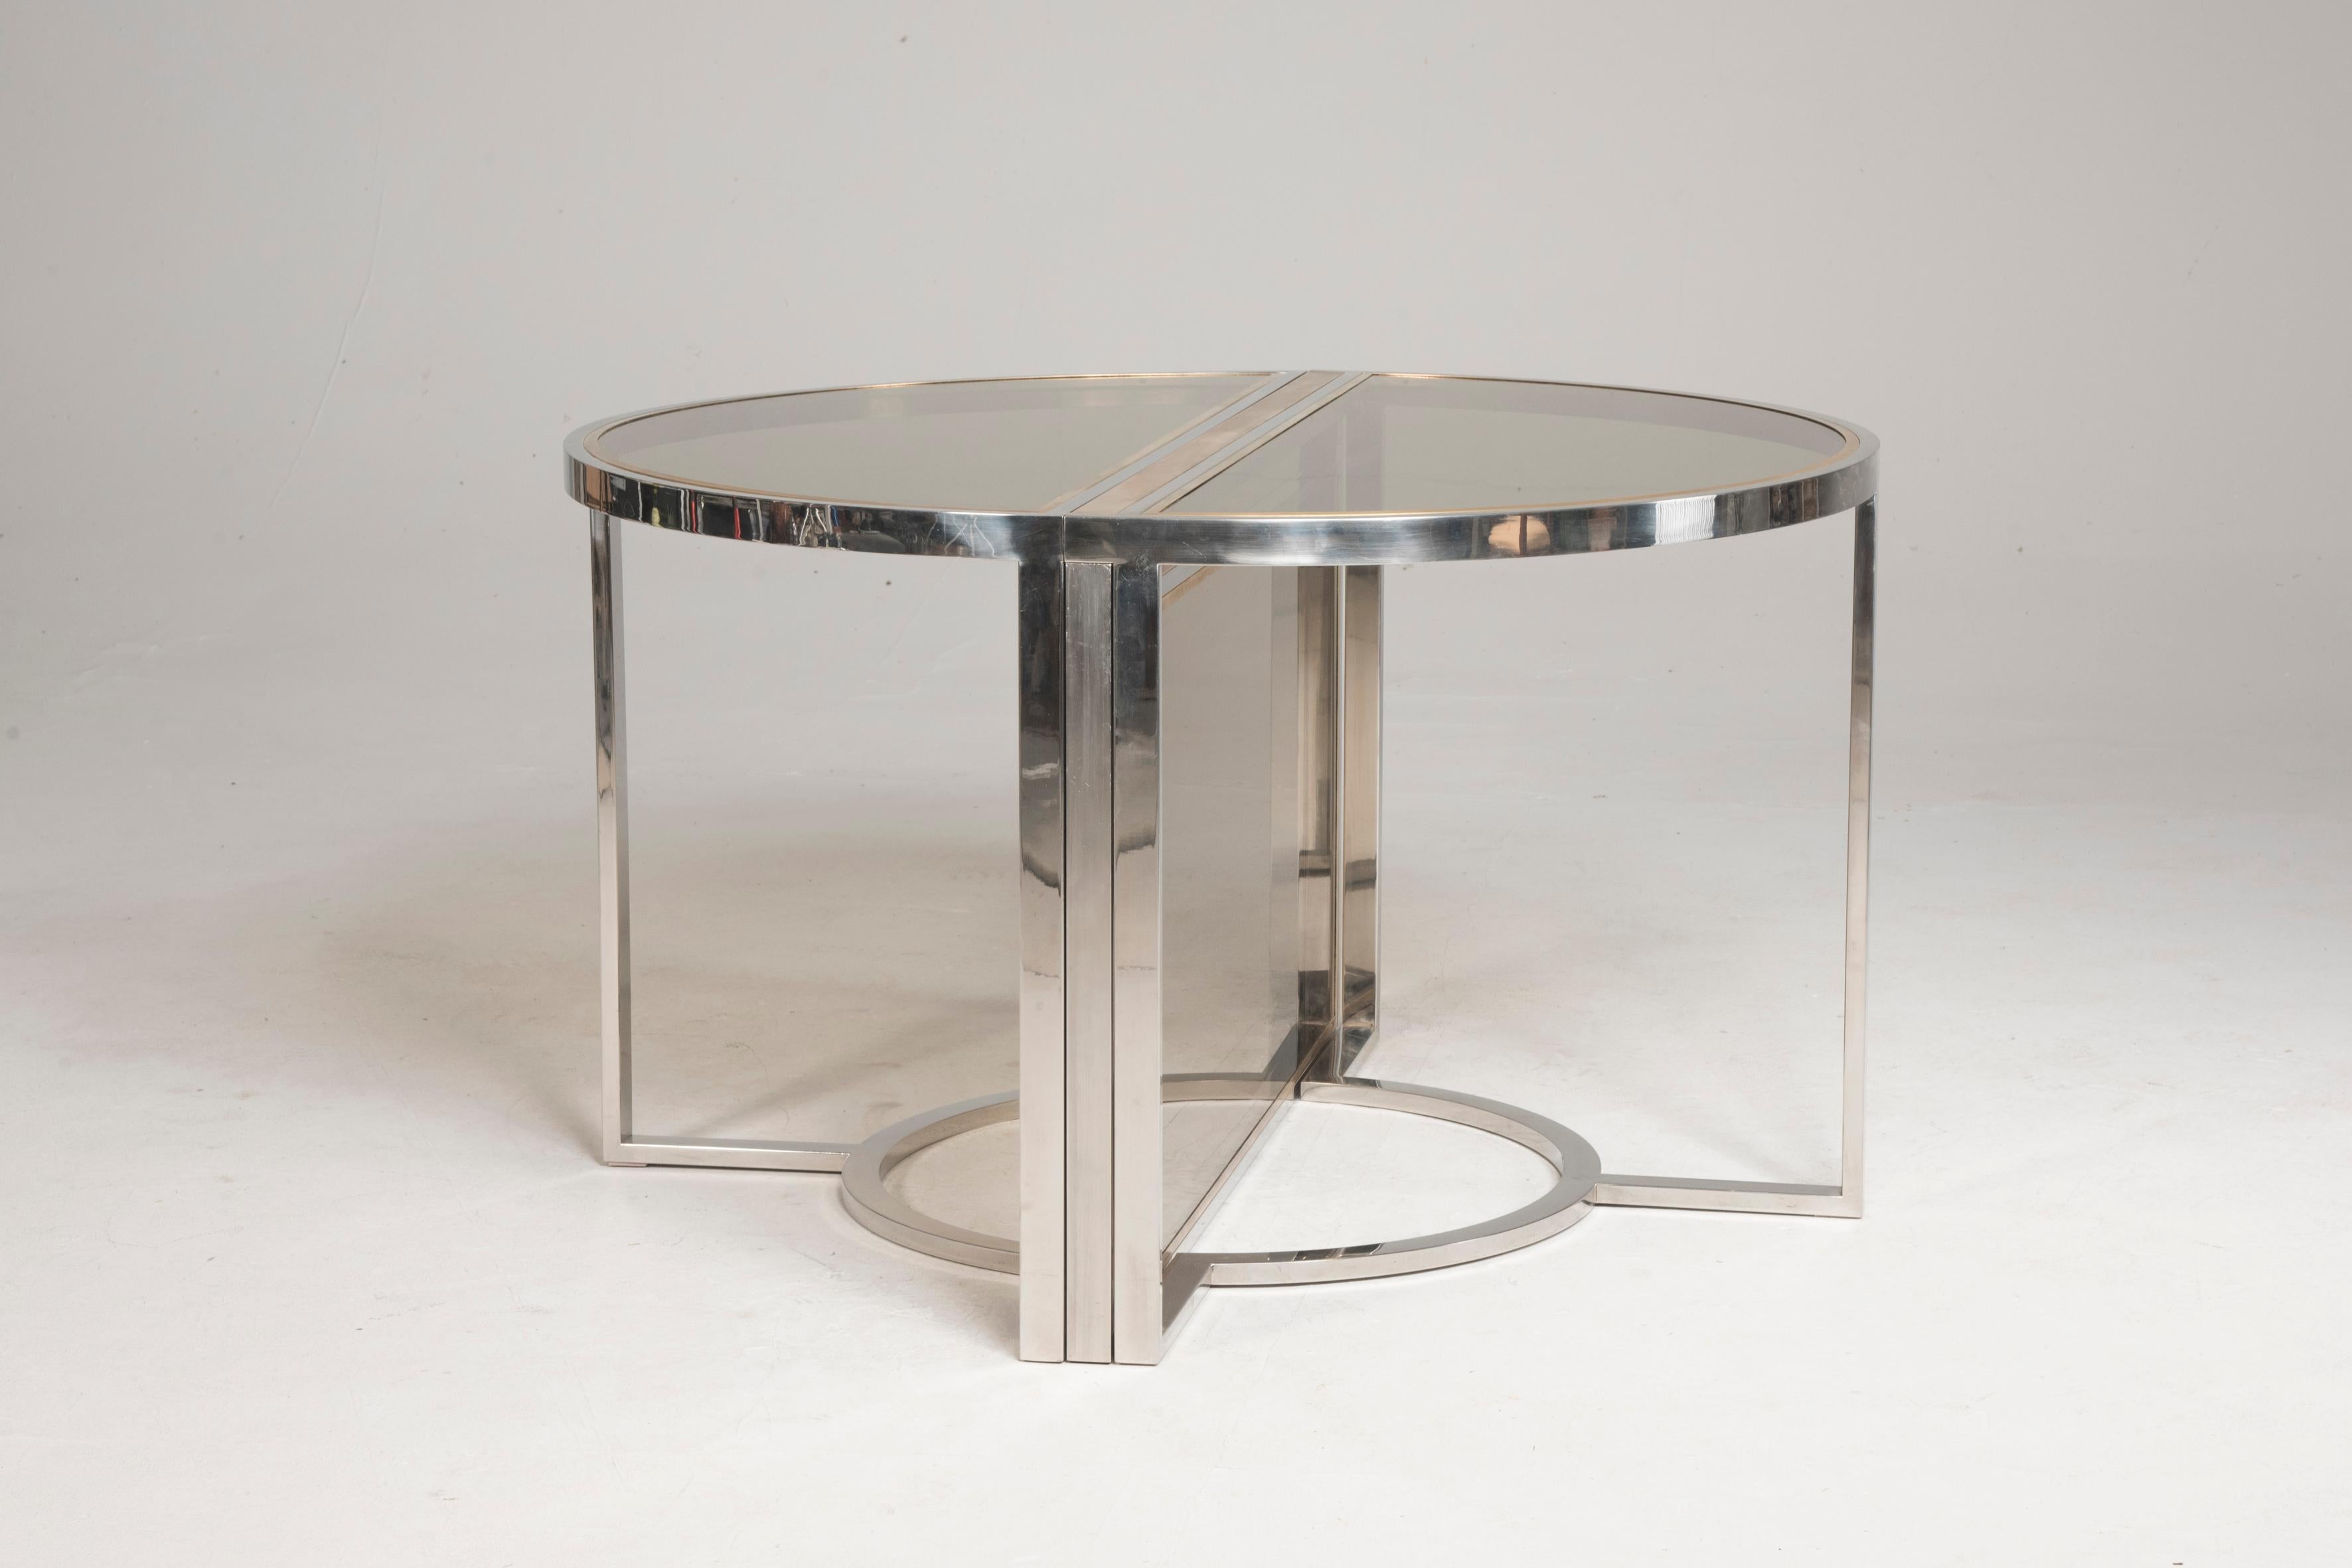 1970s Romeo Rega chromed and brass smoked glass rounded extendable table.

This is a very particular table: You have four solutions in one! rounded table, oval table, two table consoles. It is a rounded extendable table composed by two half moon